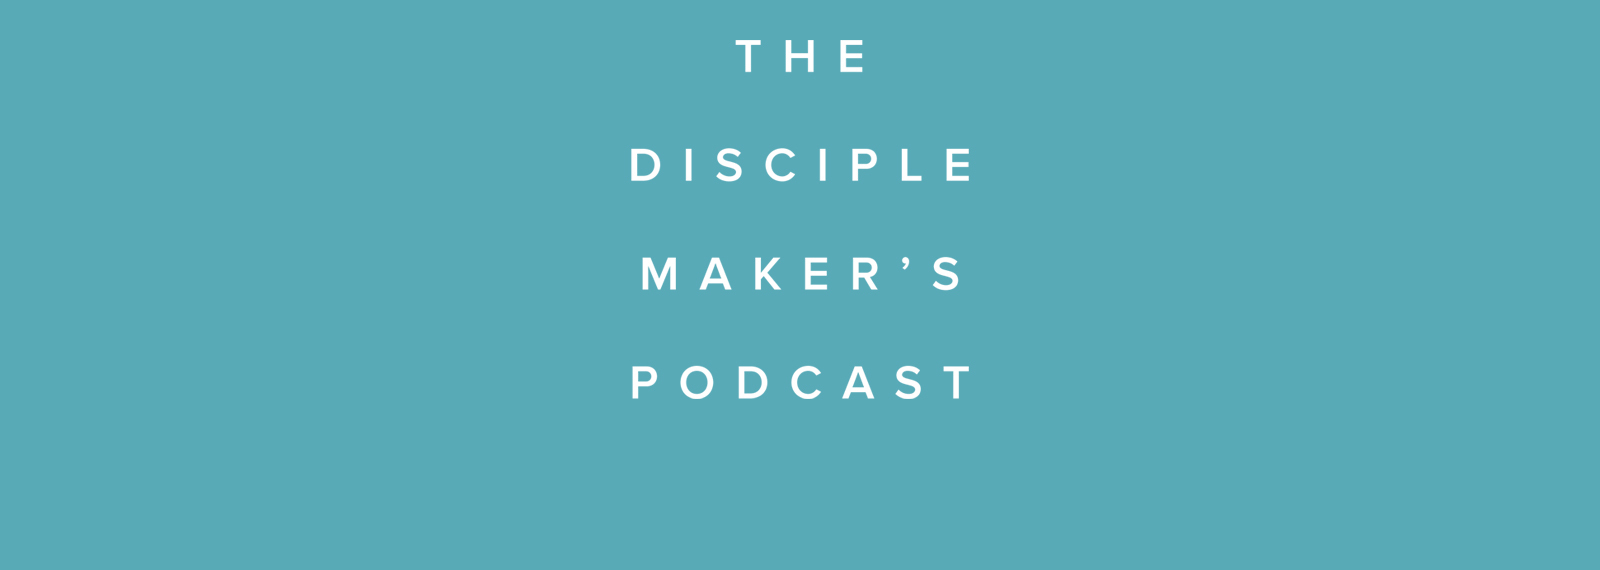 The Disciple Maker‘s Podcast